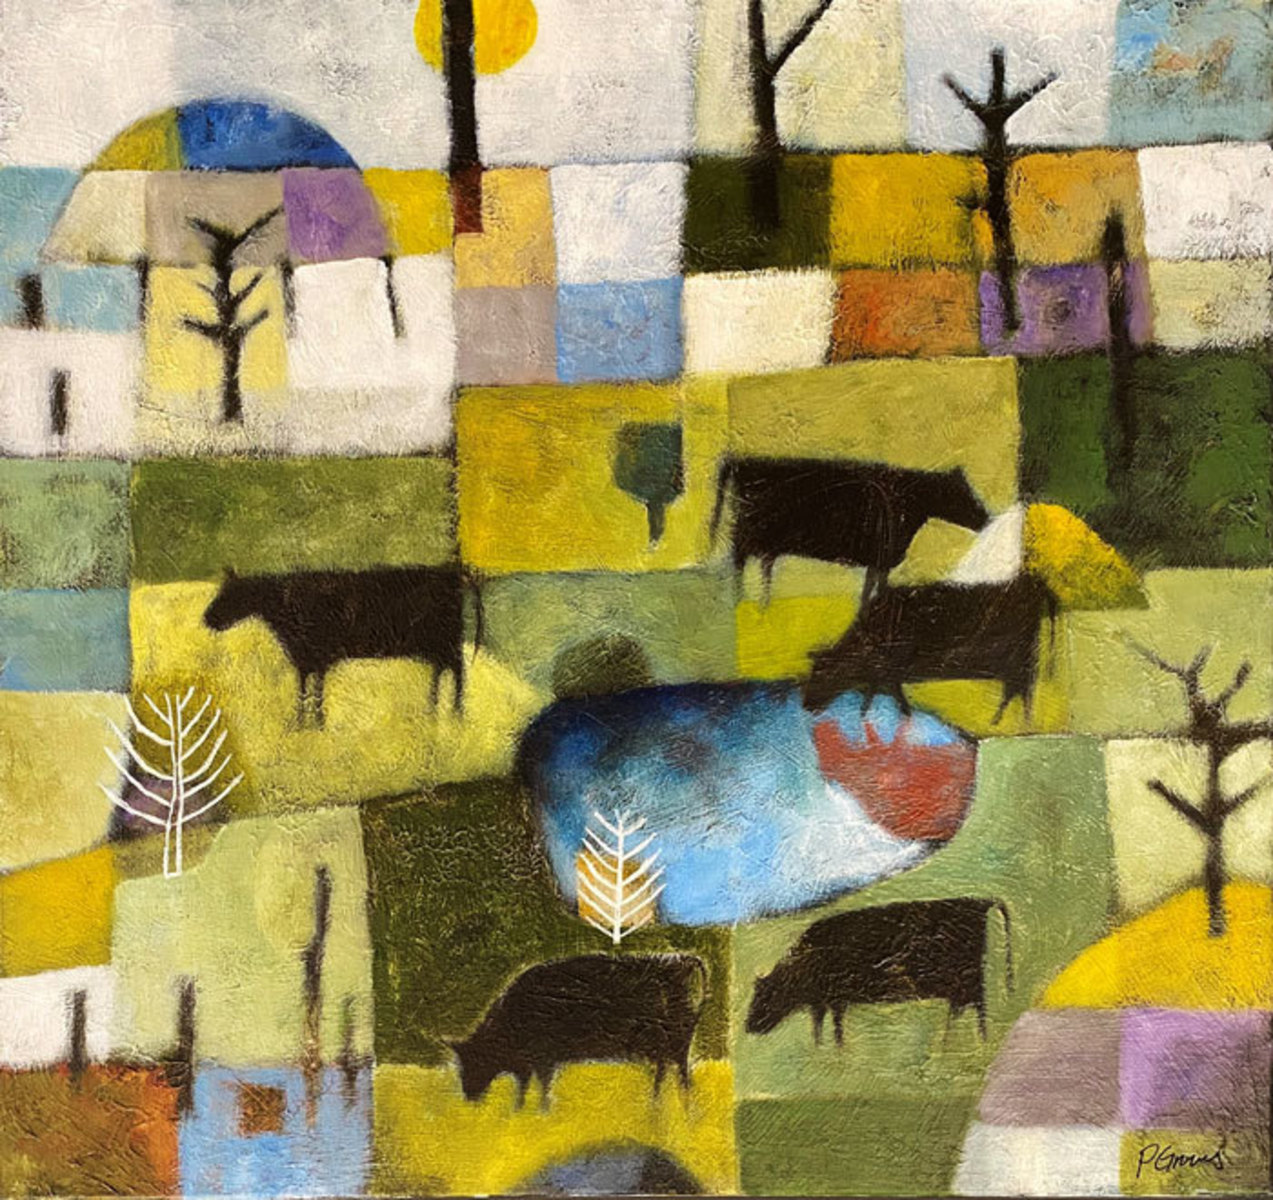 Cows on Checkered Landscape